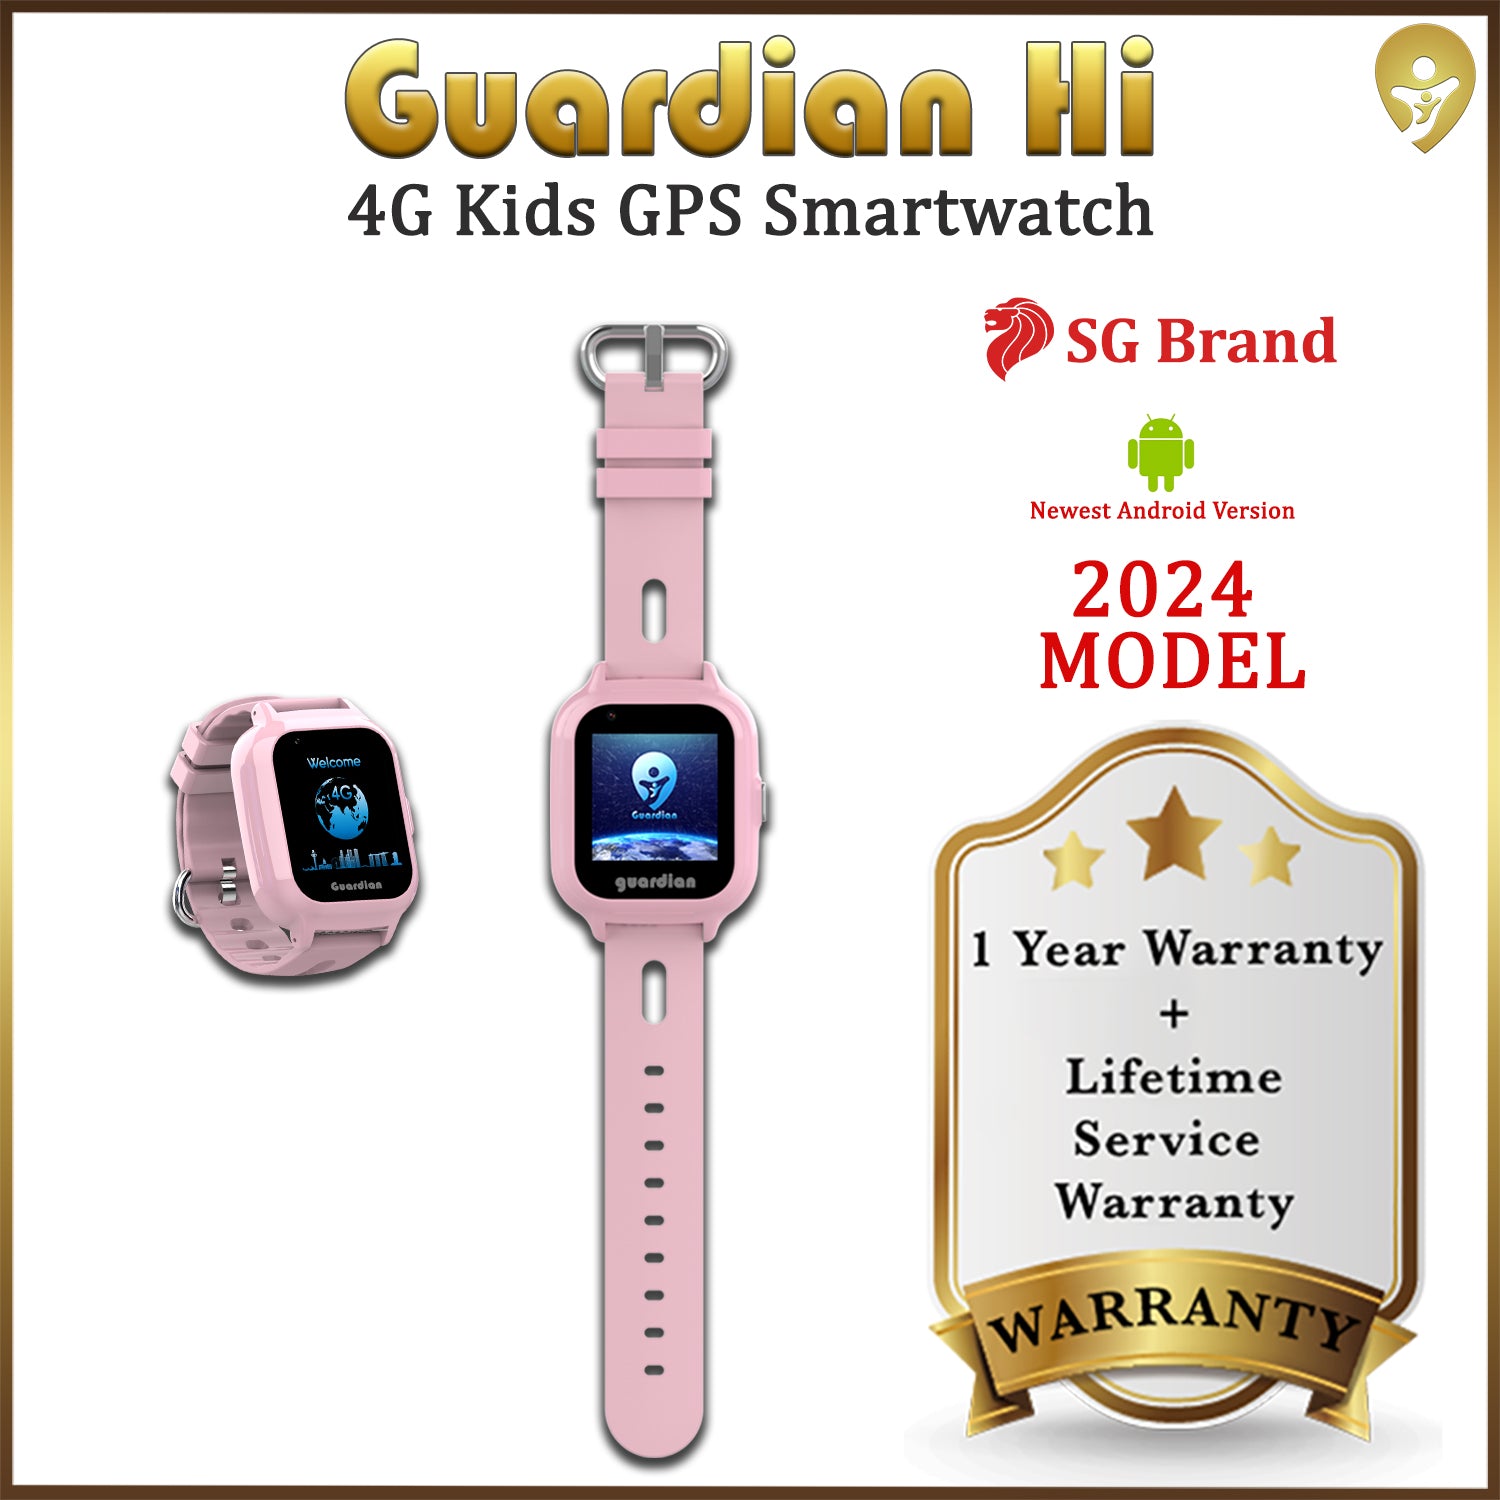 Guardian Hi 4G Kids Smartwatch With Interchangeable Straps From $168 (U.P. $188)